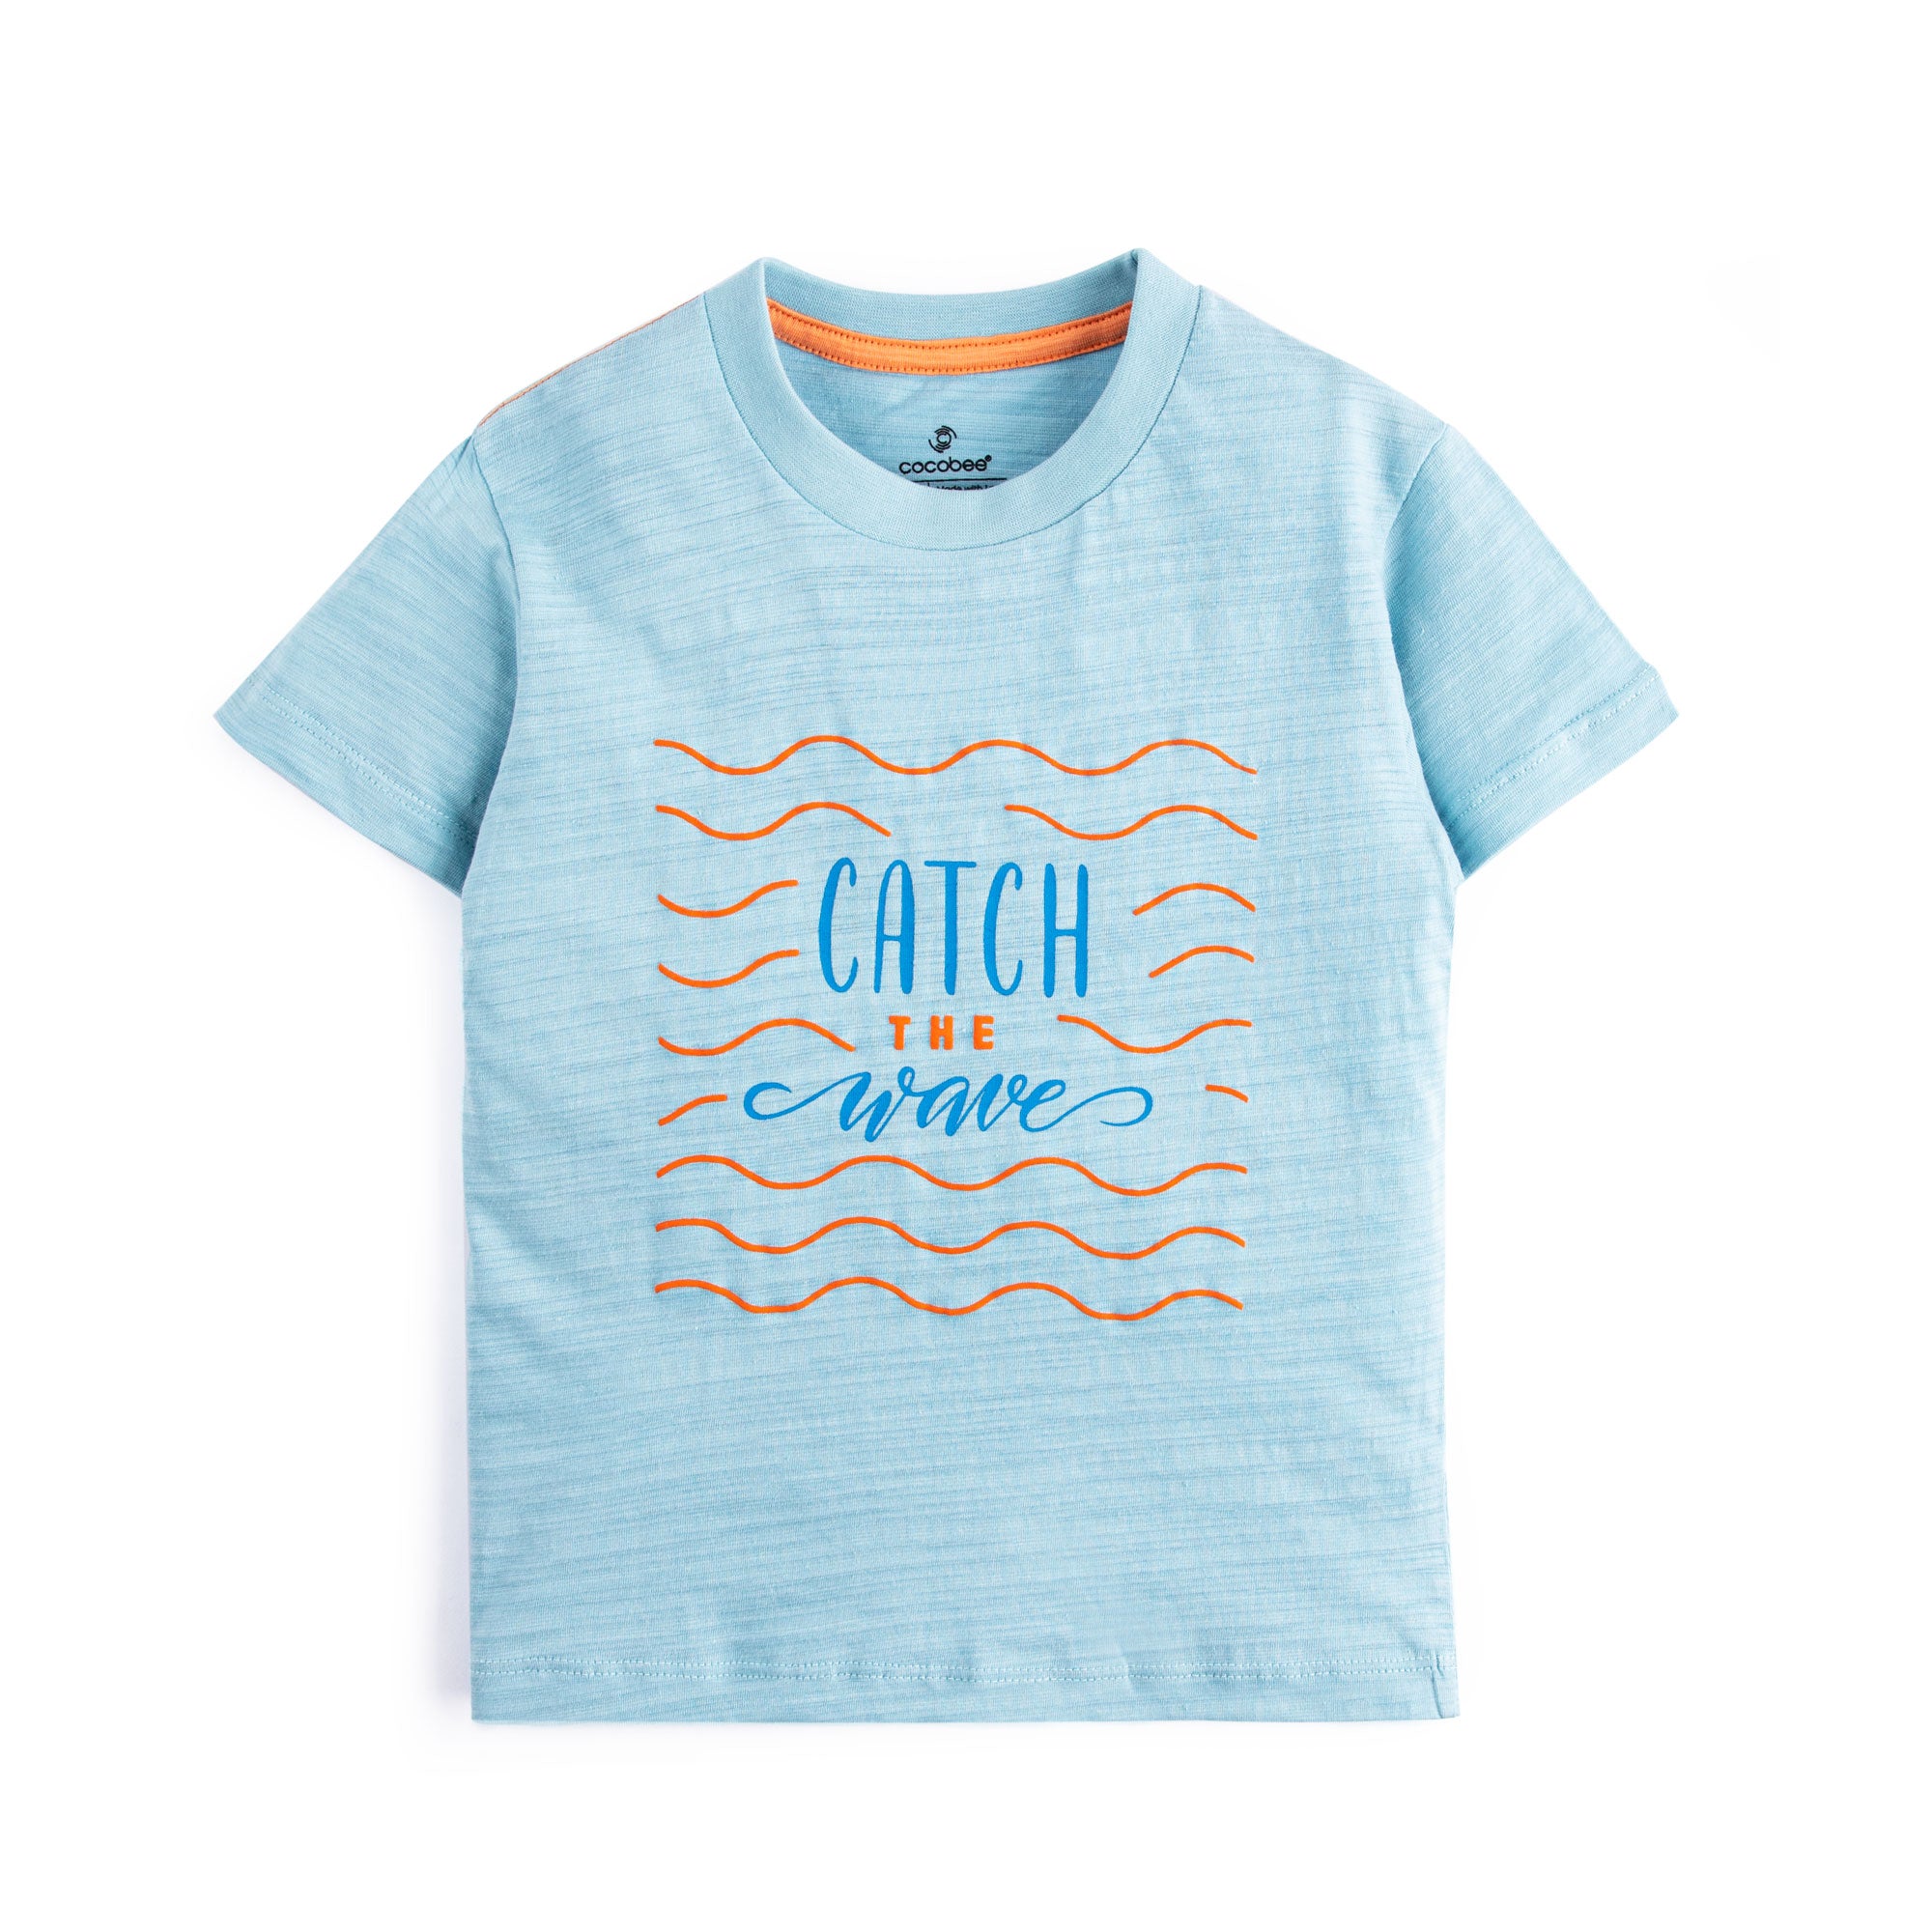 Catch the Wave T-Shirt